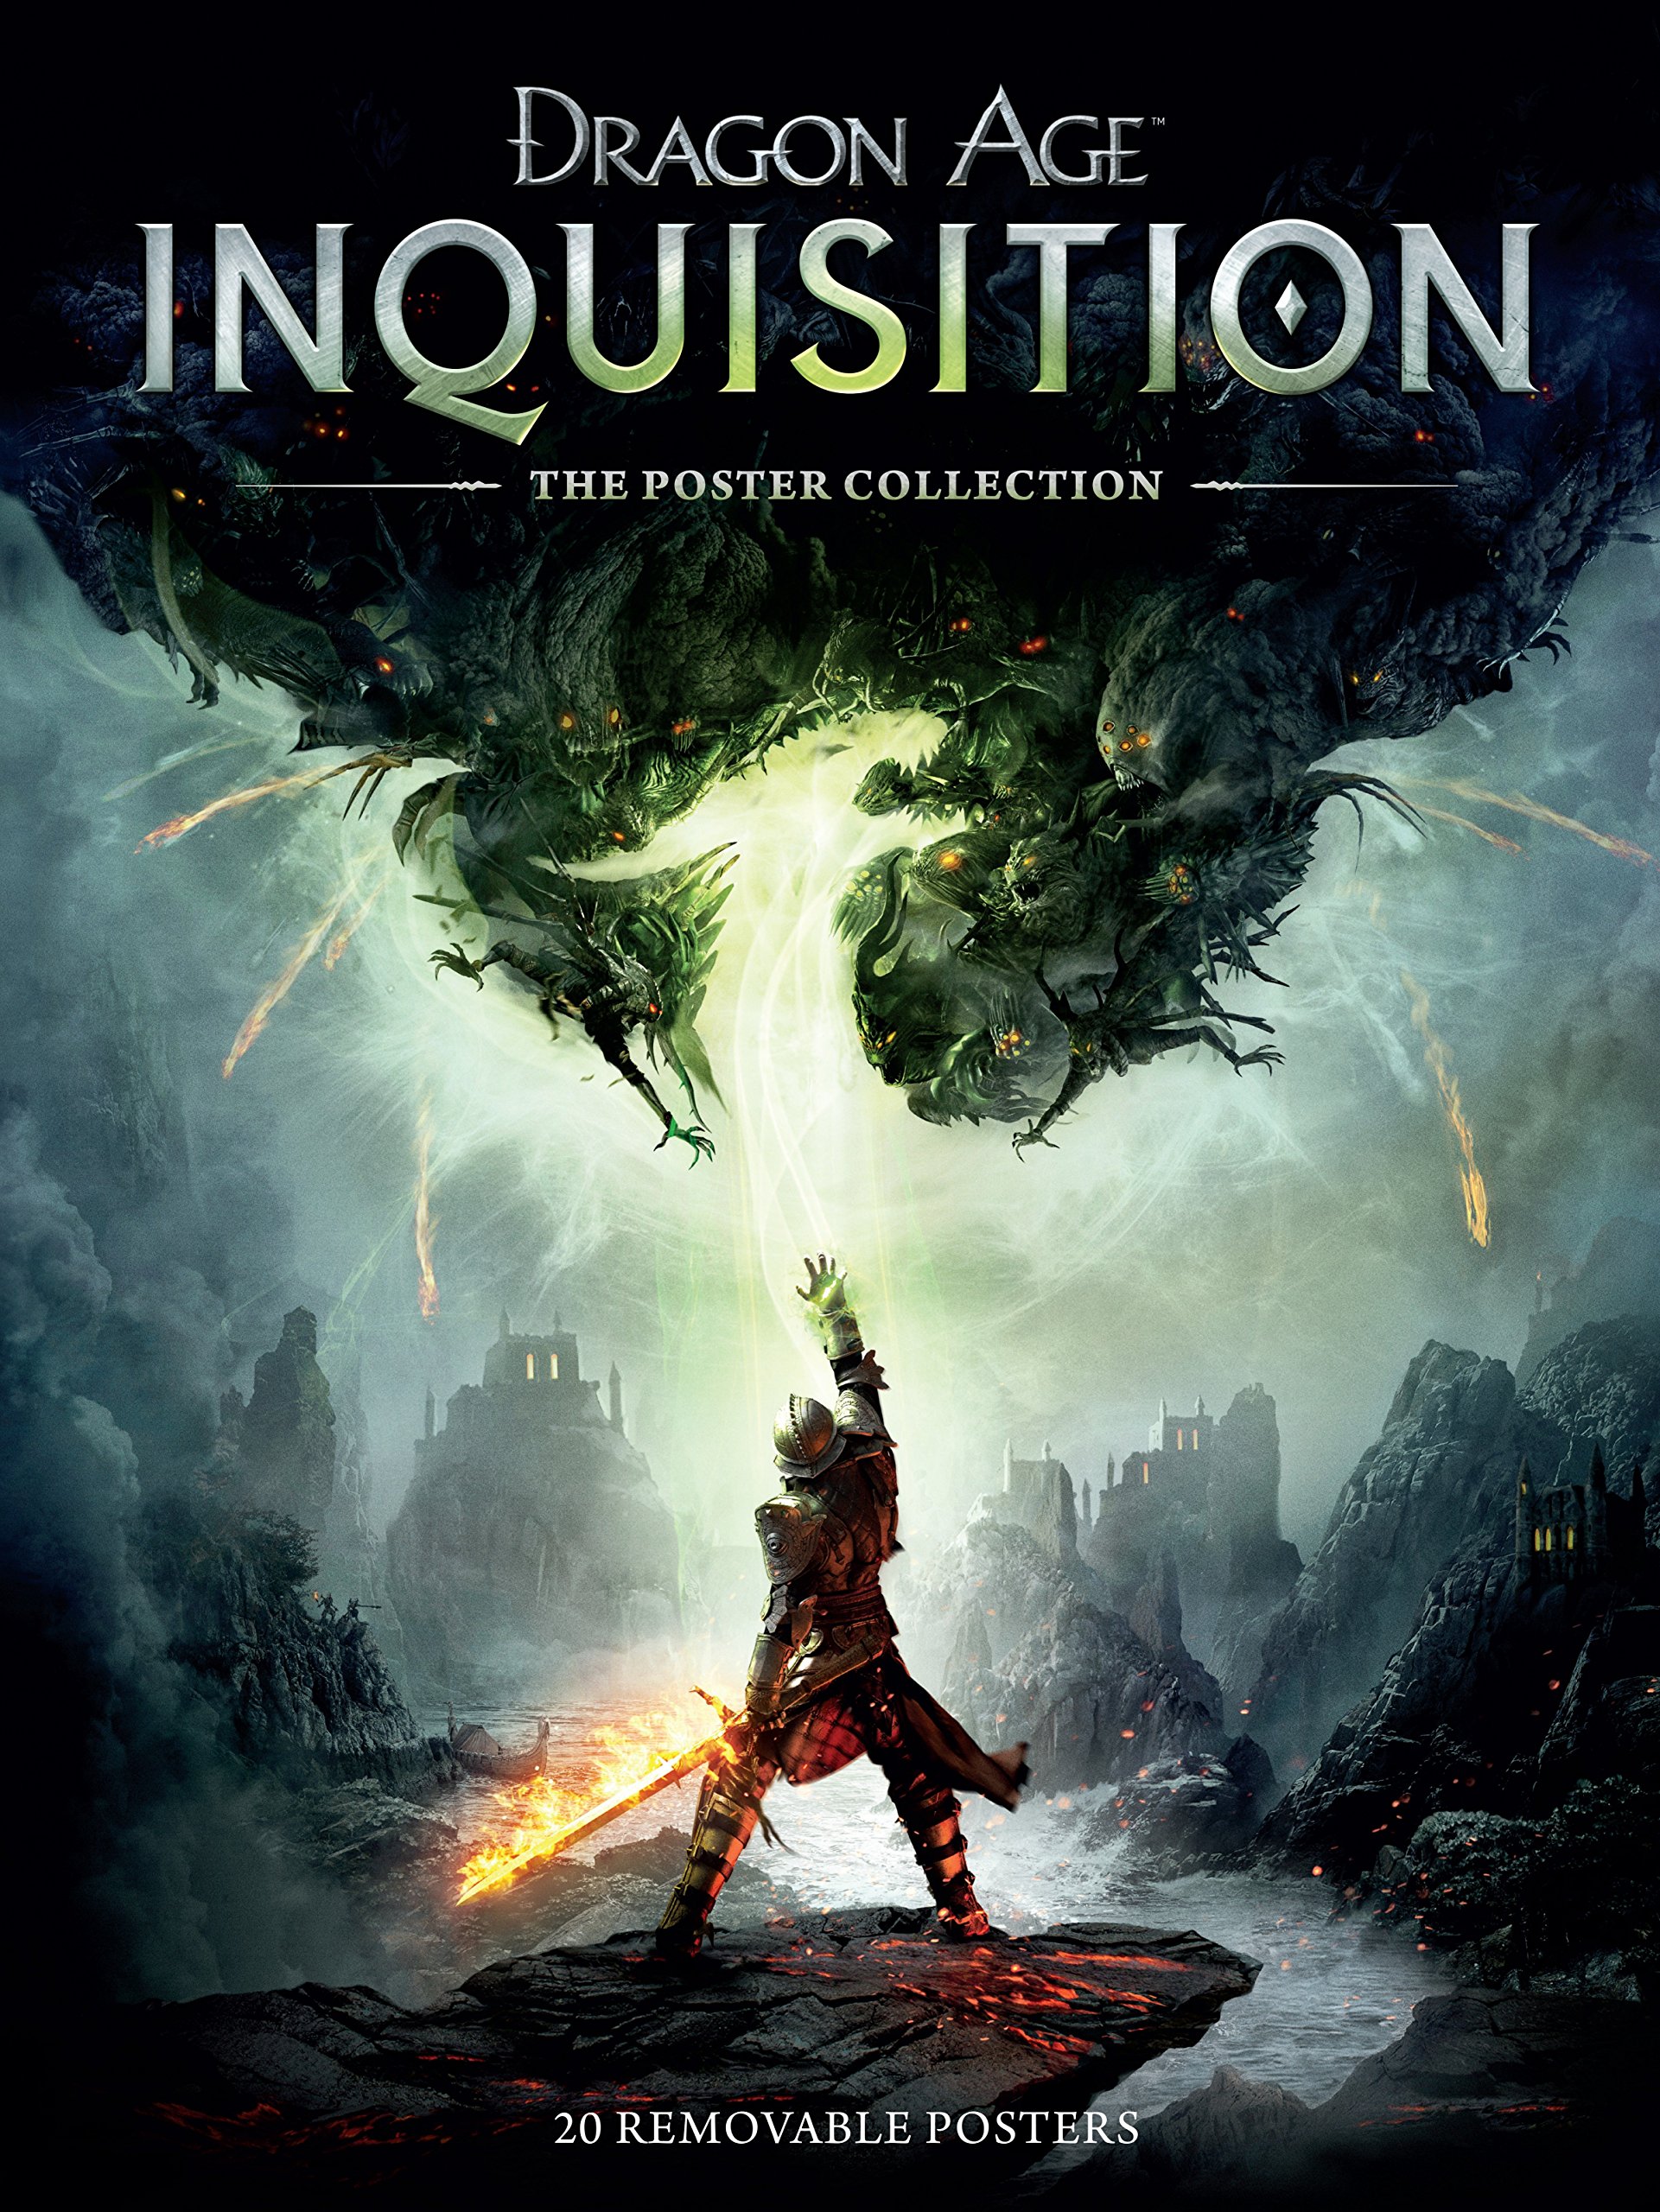 Dragon age inquisition pc download free